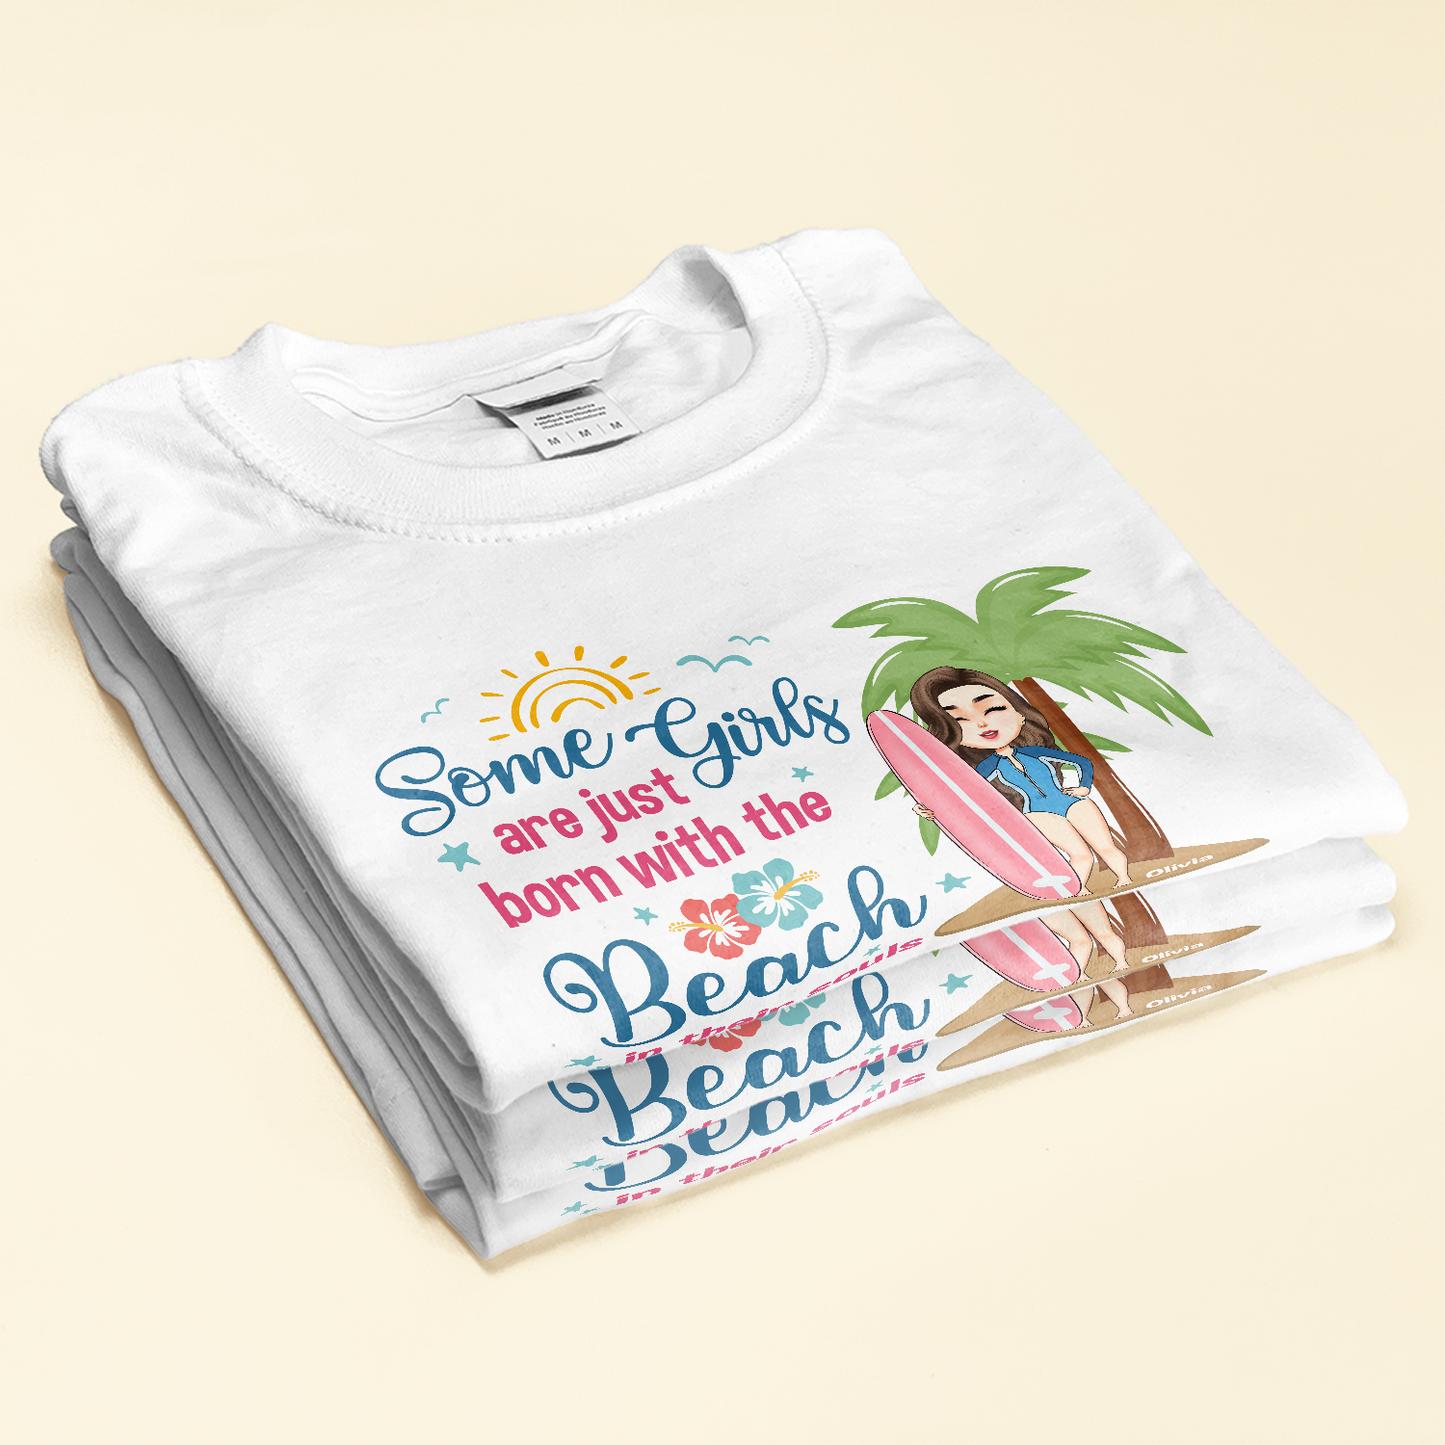 Some Girls Are Just Born With The Beach In Their Souls - Personalized Shirt - Summer, Birthday Gift For Surfing Lovers, Surfers, Girl Friends